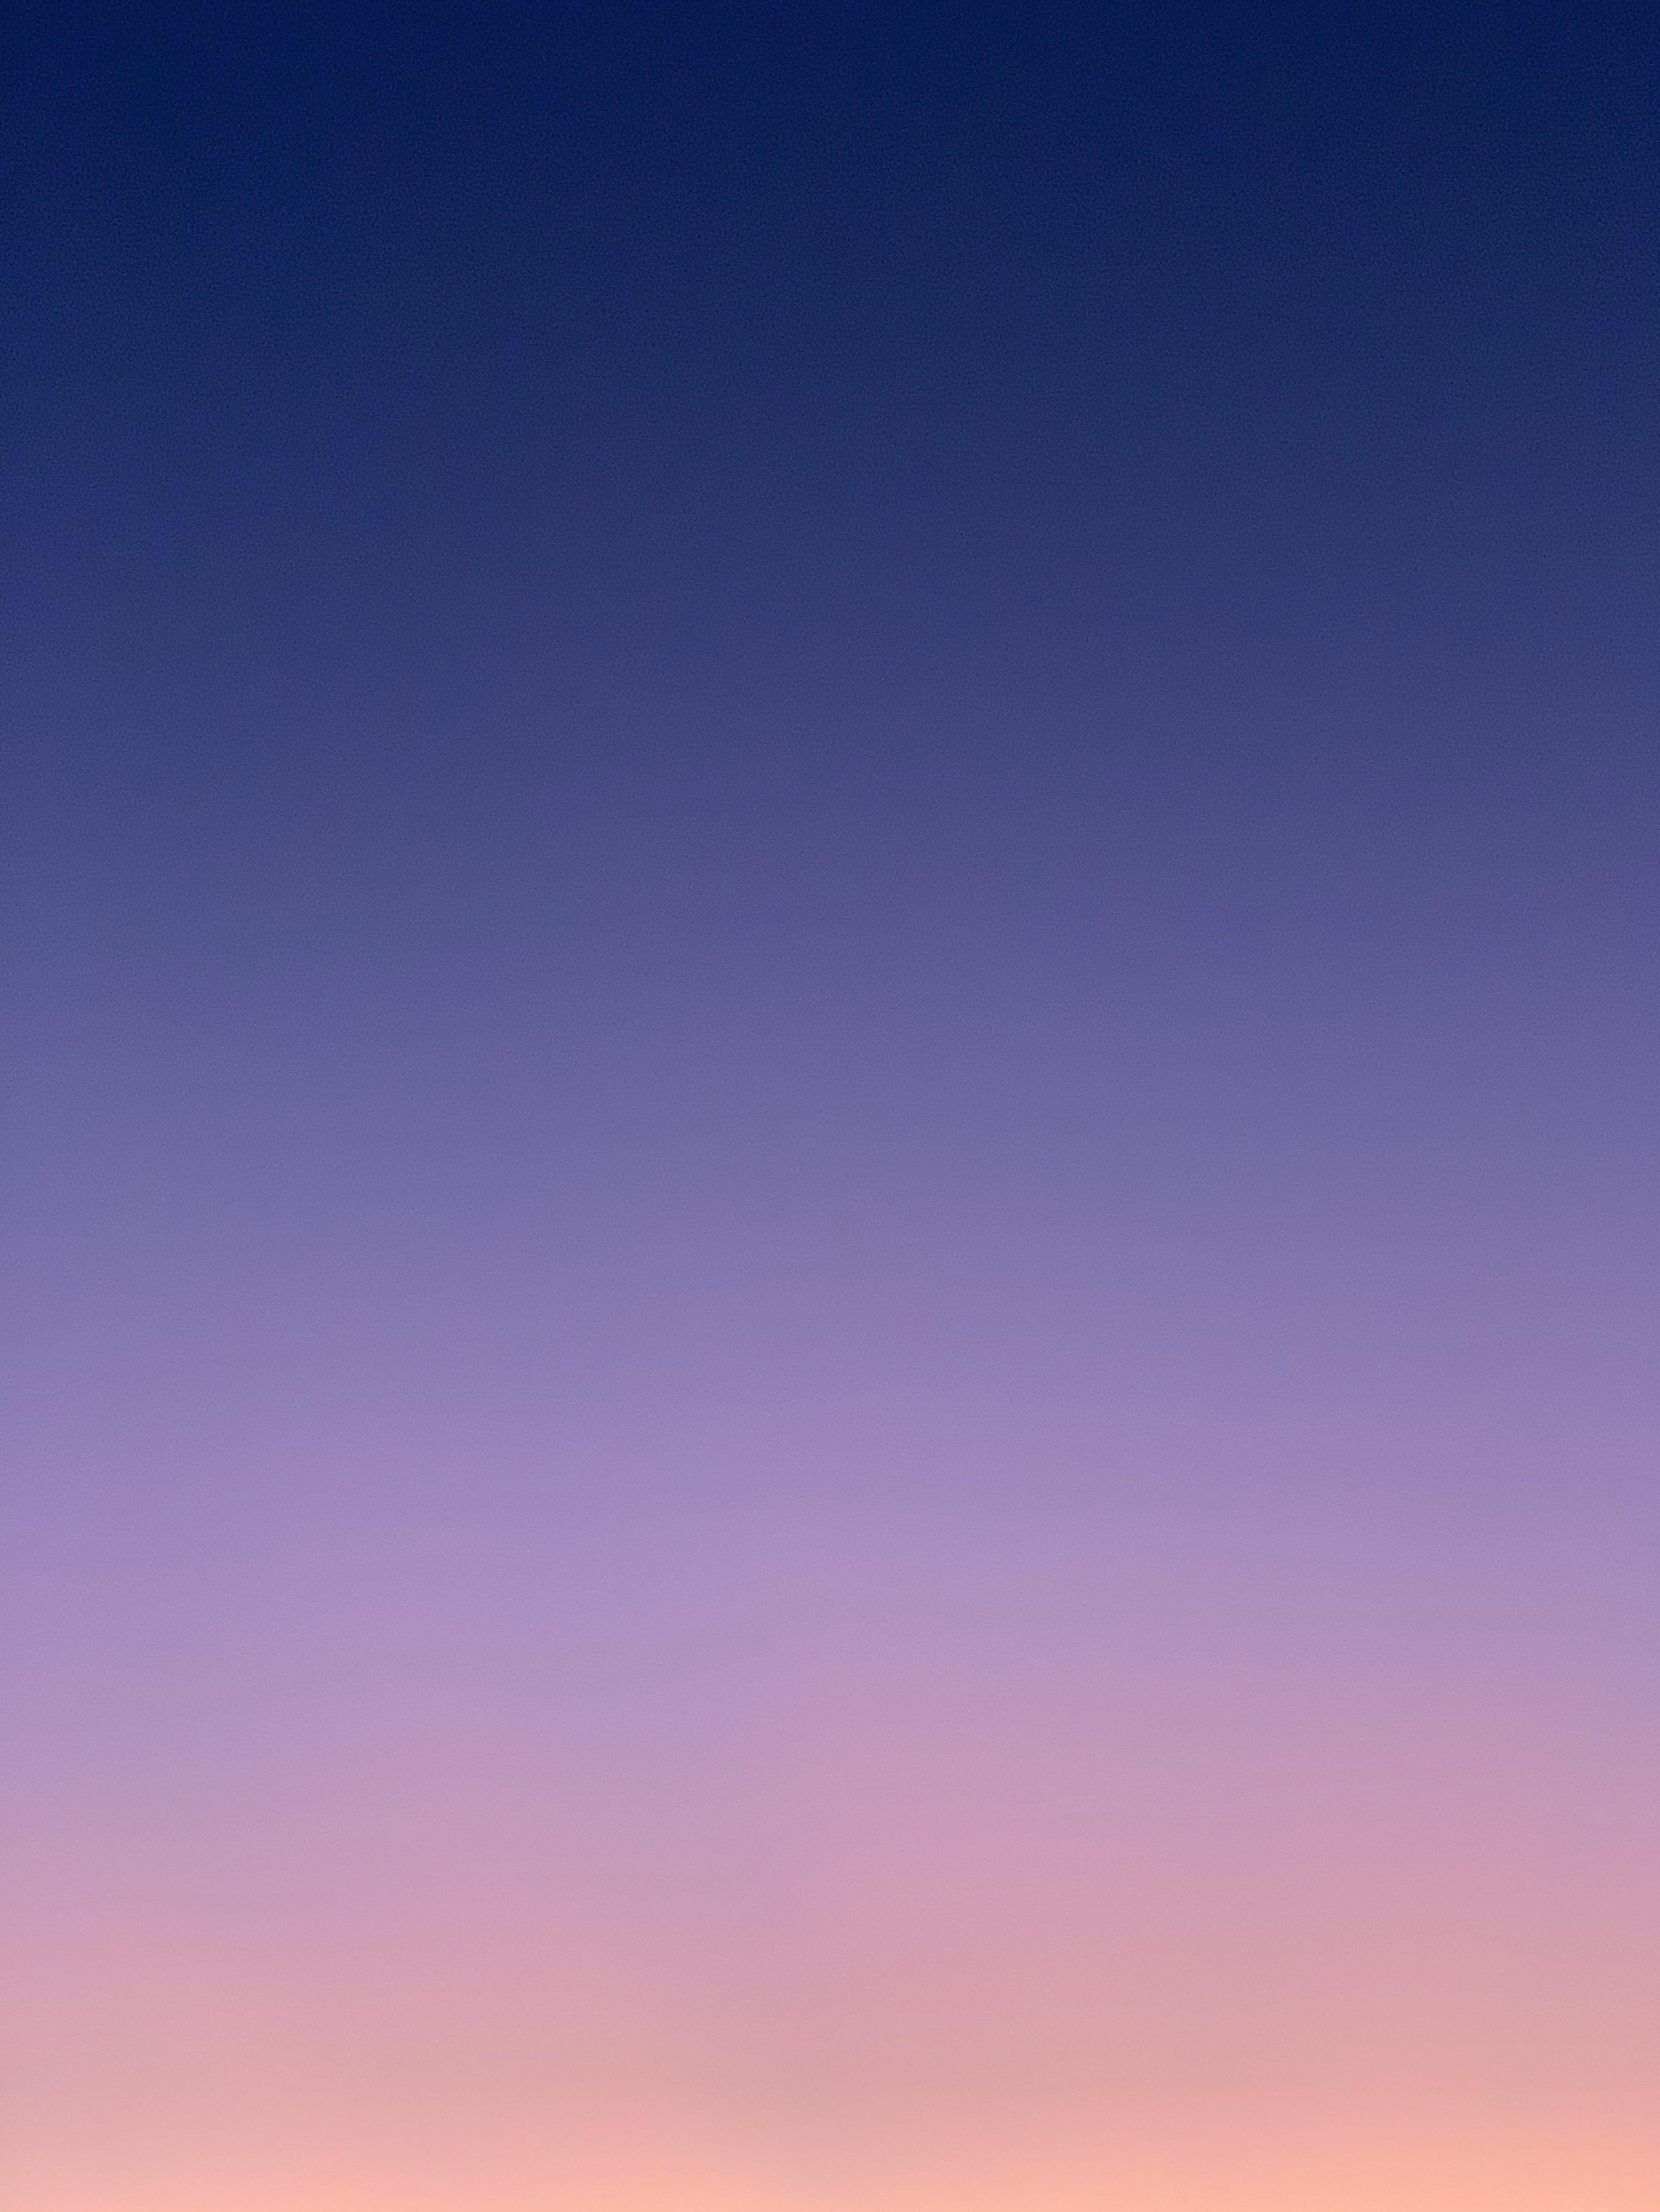 Pink Gradient Background Wallpaper Image For Free Download